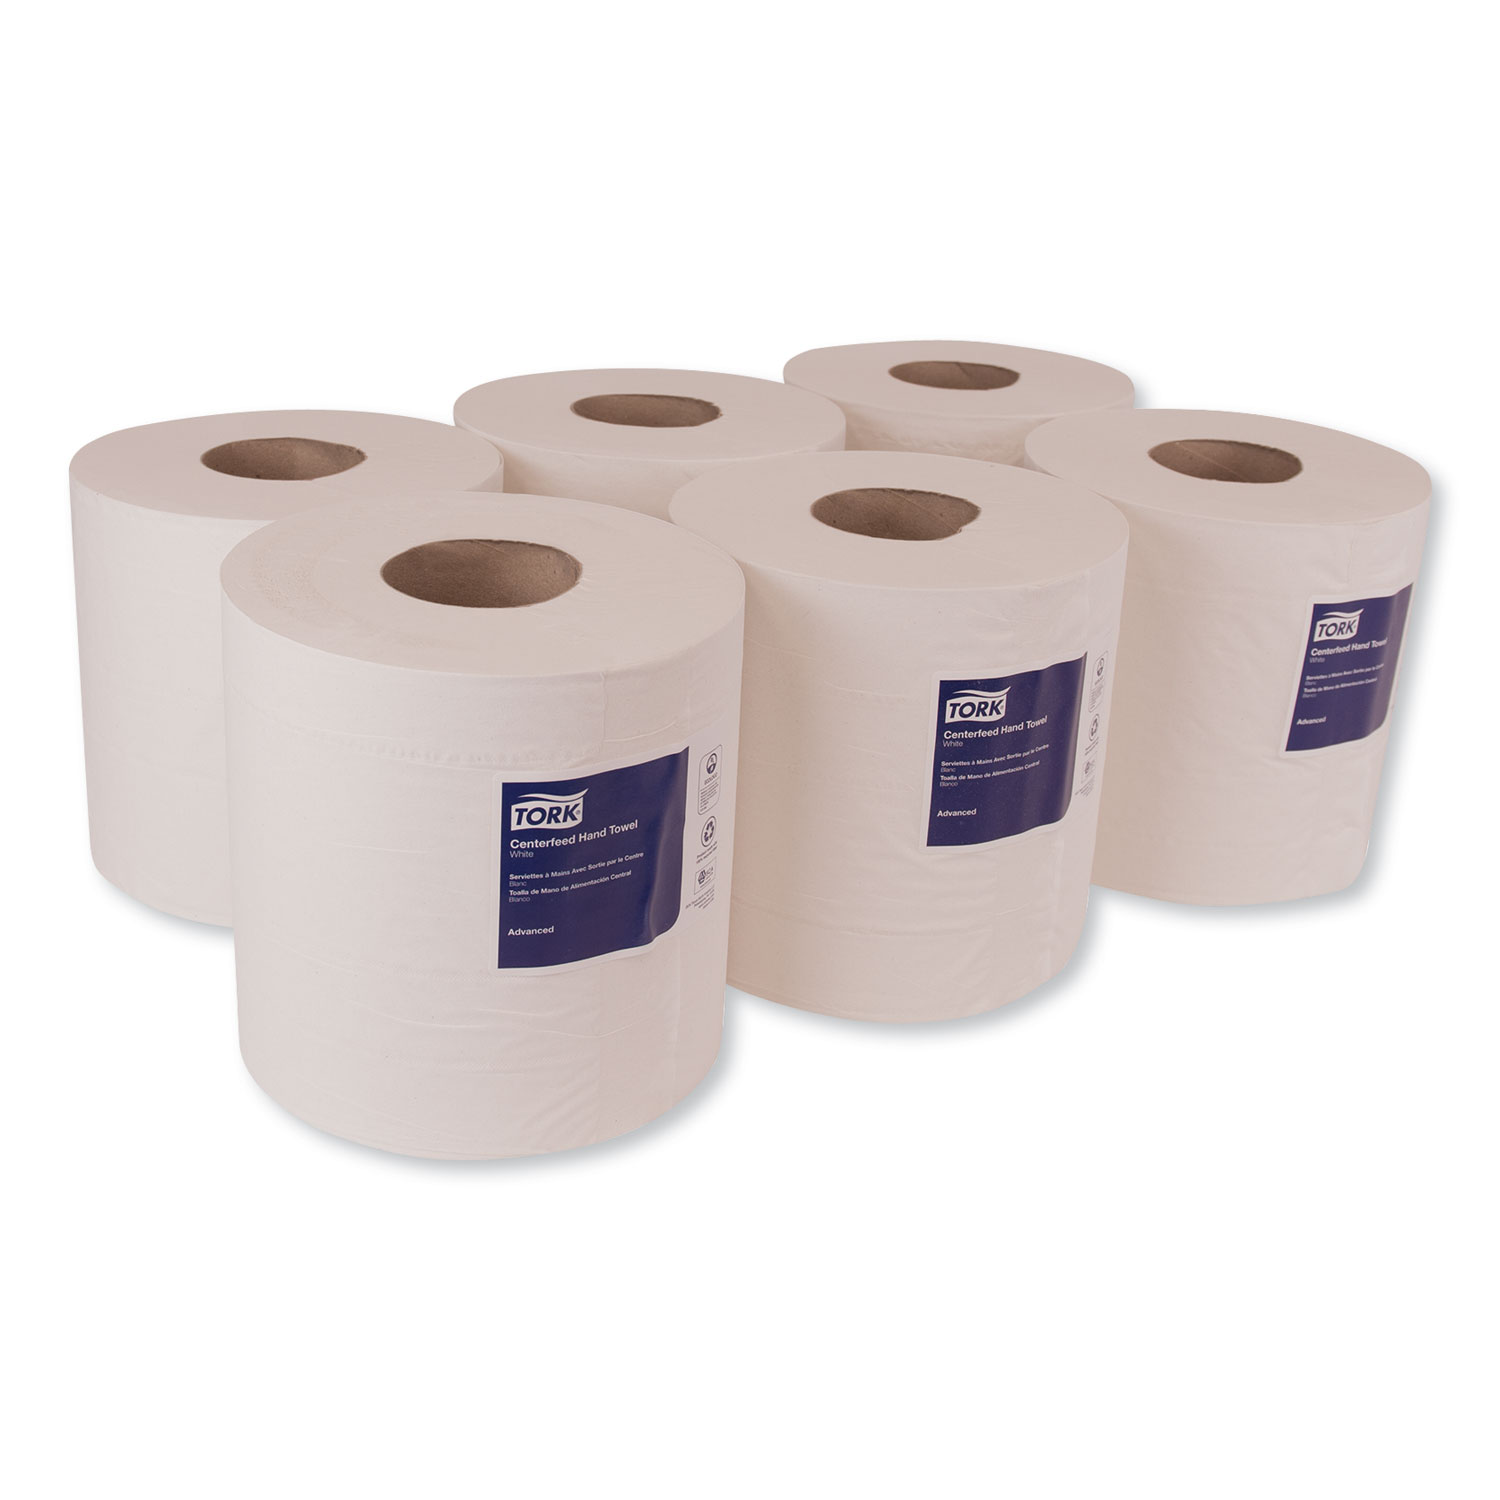 Centerfeed Hand Towel, 2-Ply, 7.6 x 11.8, White, 600/Roll, 6 Rolls ...